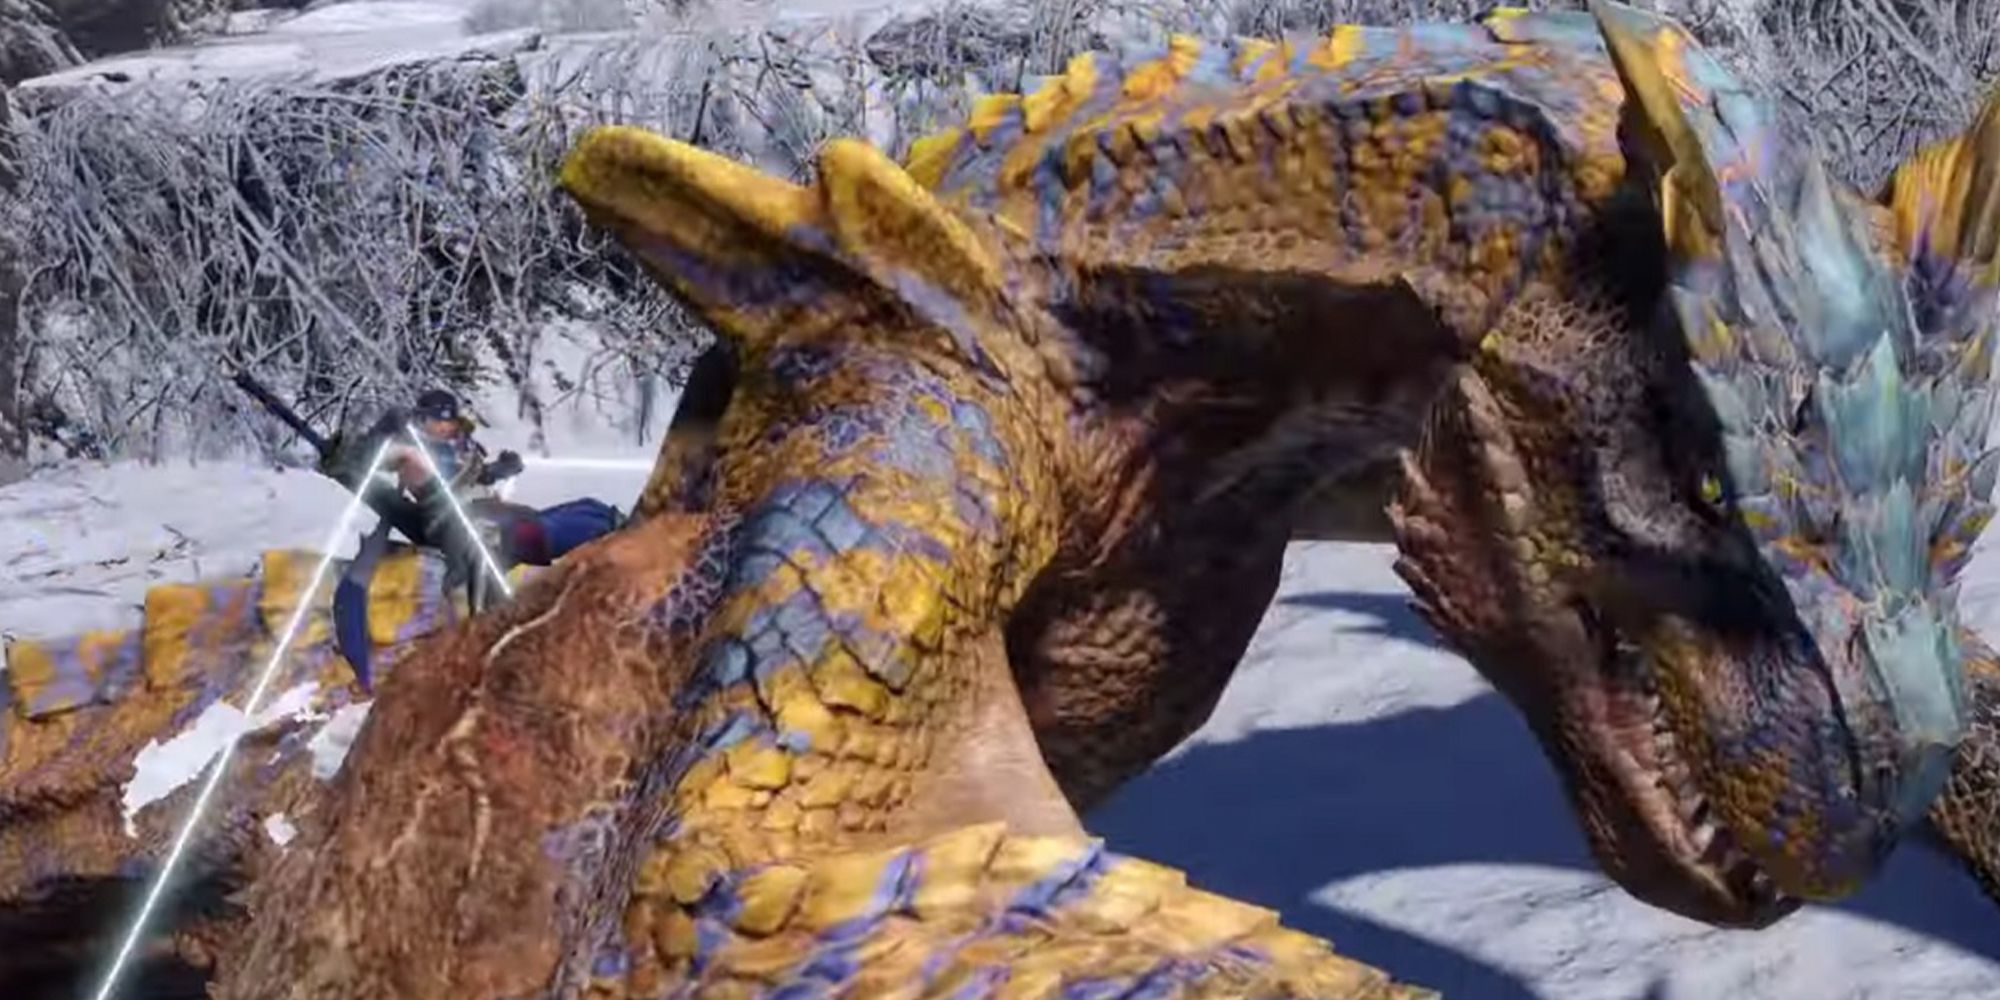 Wyvern Riding: How to Mount Monsters in Monster Hunter Rise